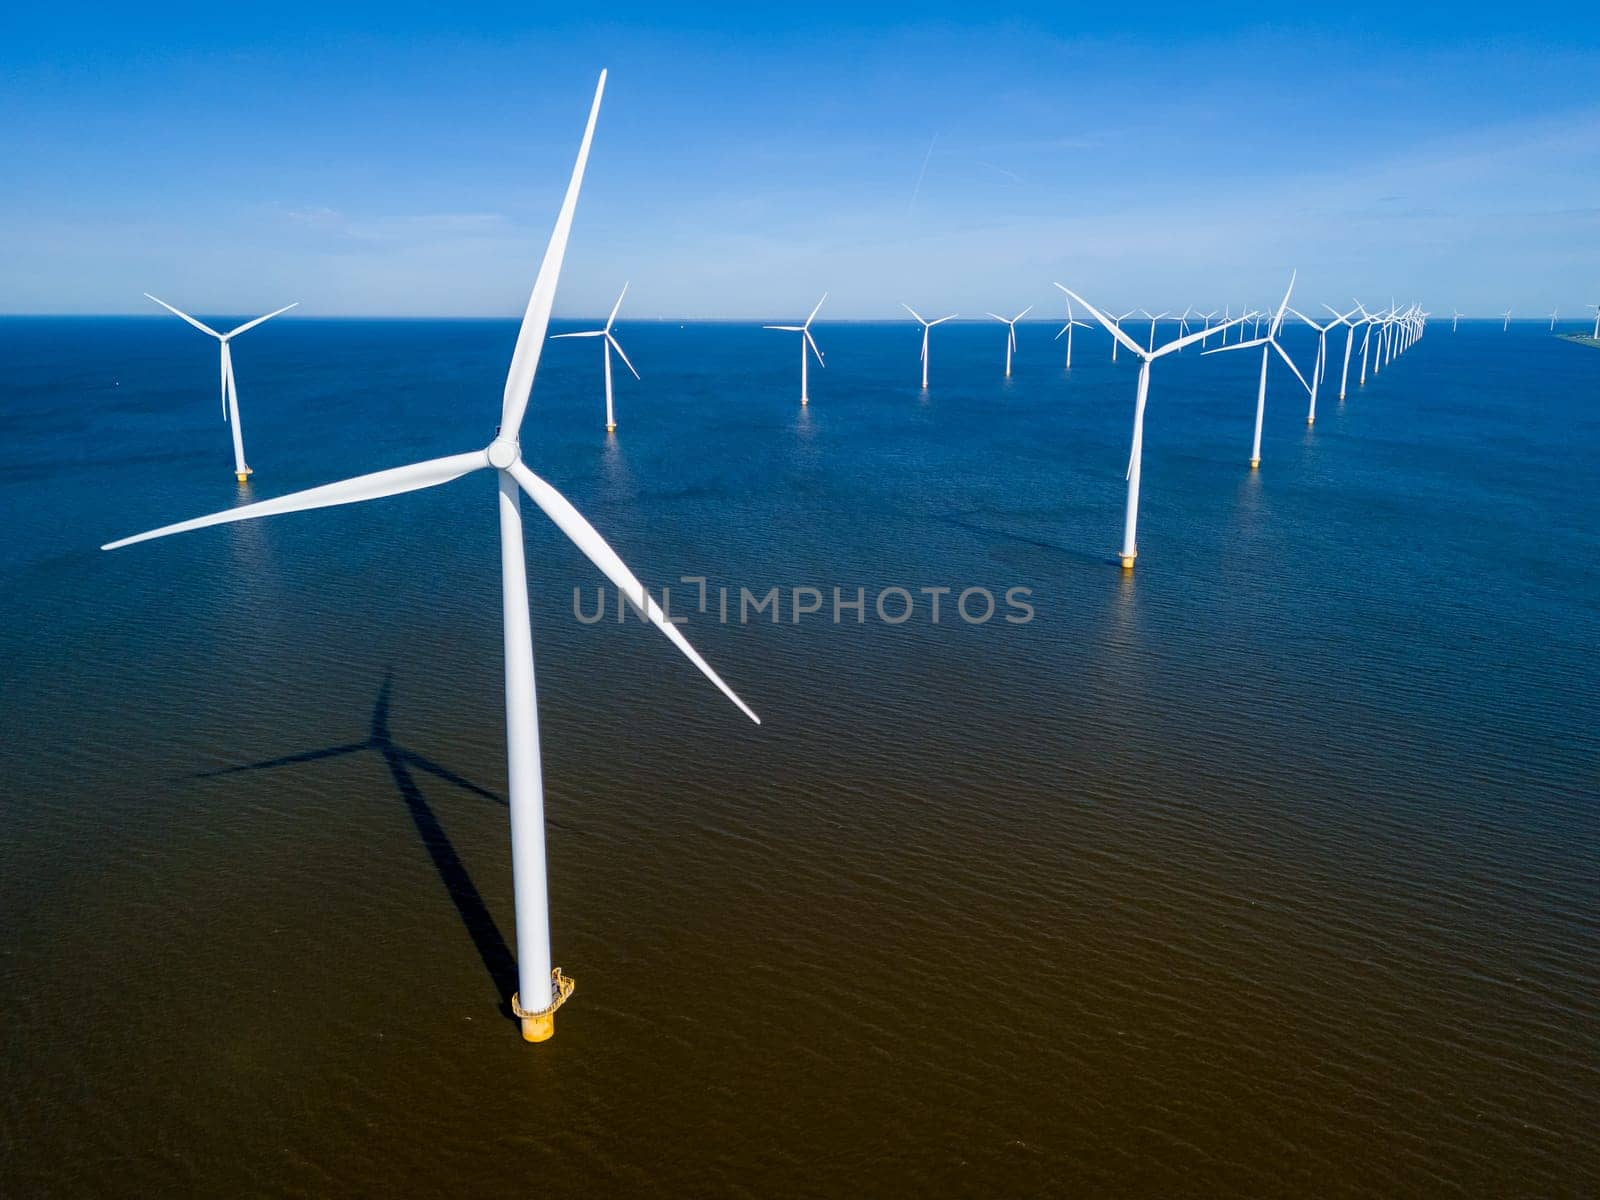 A group of windmills floats gracefully in the Netherlands Flevoland region during the vibrant season of Spring. drone aerial view of windmill turbines green energy in the blue ocean